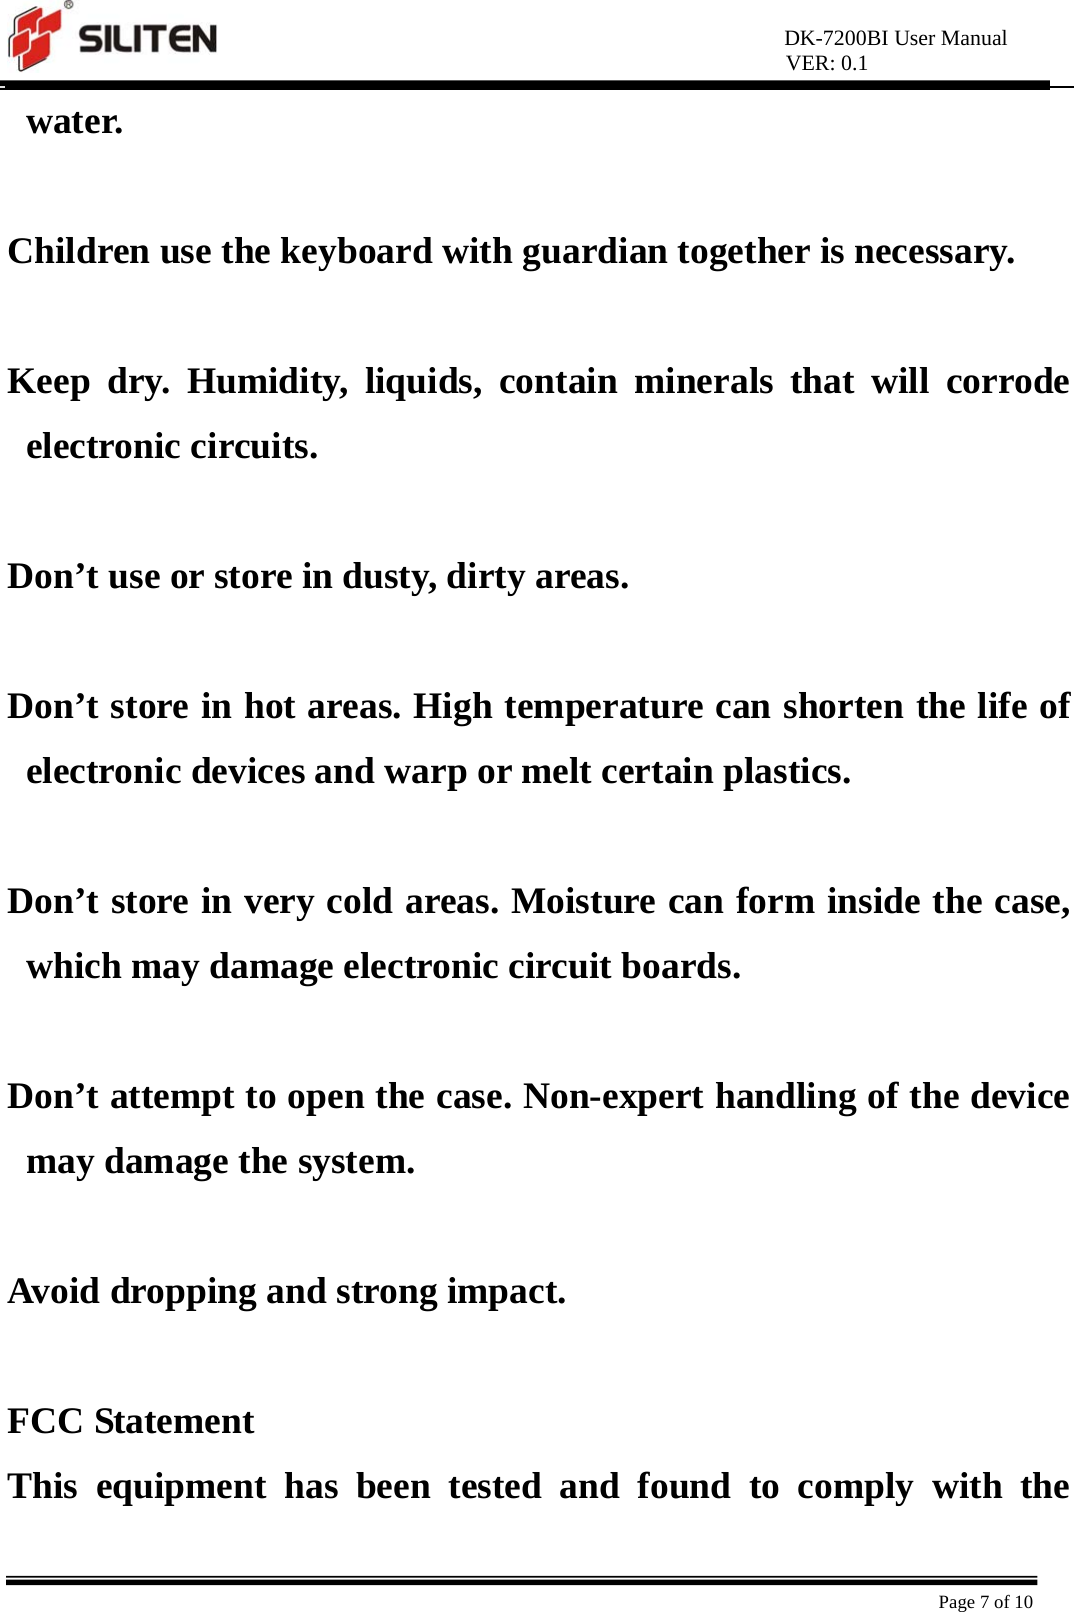 DK-7200BI User Manual VER: 0.1  Page 7 of 10 water.  Children use the keyboard with guardian together is necessary.  Keep dry. Humidity, liquids, contain minerals that will corrode electronic circuits.  Don’t use or store in dusty, dirty areas.  Don’t store in hot areas. High temperature can shorten the life of electronic devices and warp or melt certain plastics.  Don’t store in very cold areas. Moisture can form inside the case, which may damage electronic circuit boards.  Don’t attempt to open the case. Non-expert handling of the device may damage the system.    Avoid dropping and strong impact.  FCC Statement   This equipment has been tested and found to comply with the 